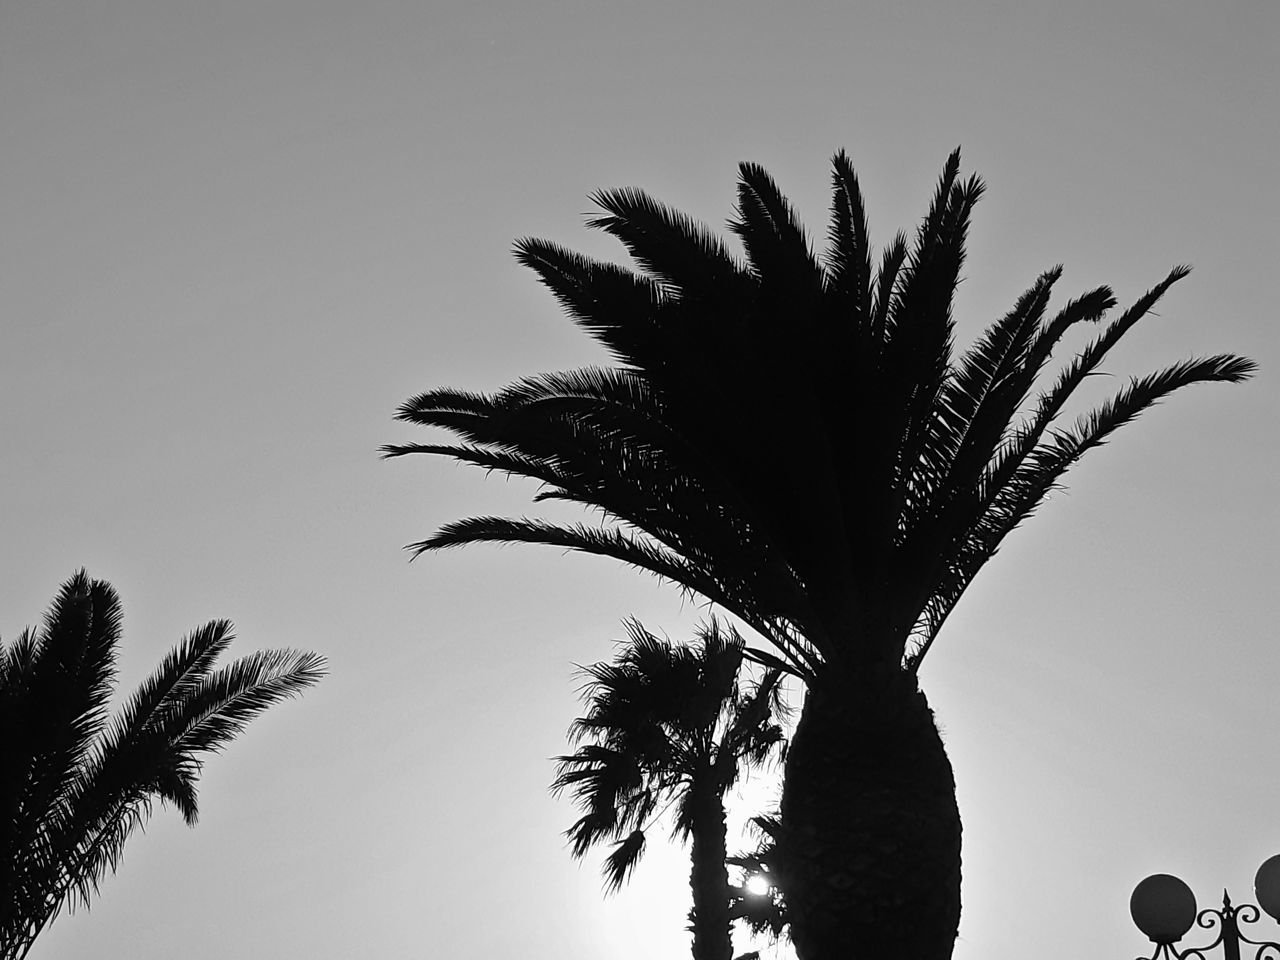 LOW ANGLE VIEW OF SILHOUETTE PALM TREE AGAINST CLEAR SKY